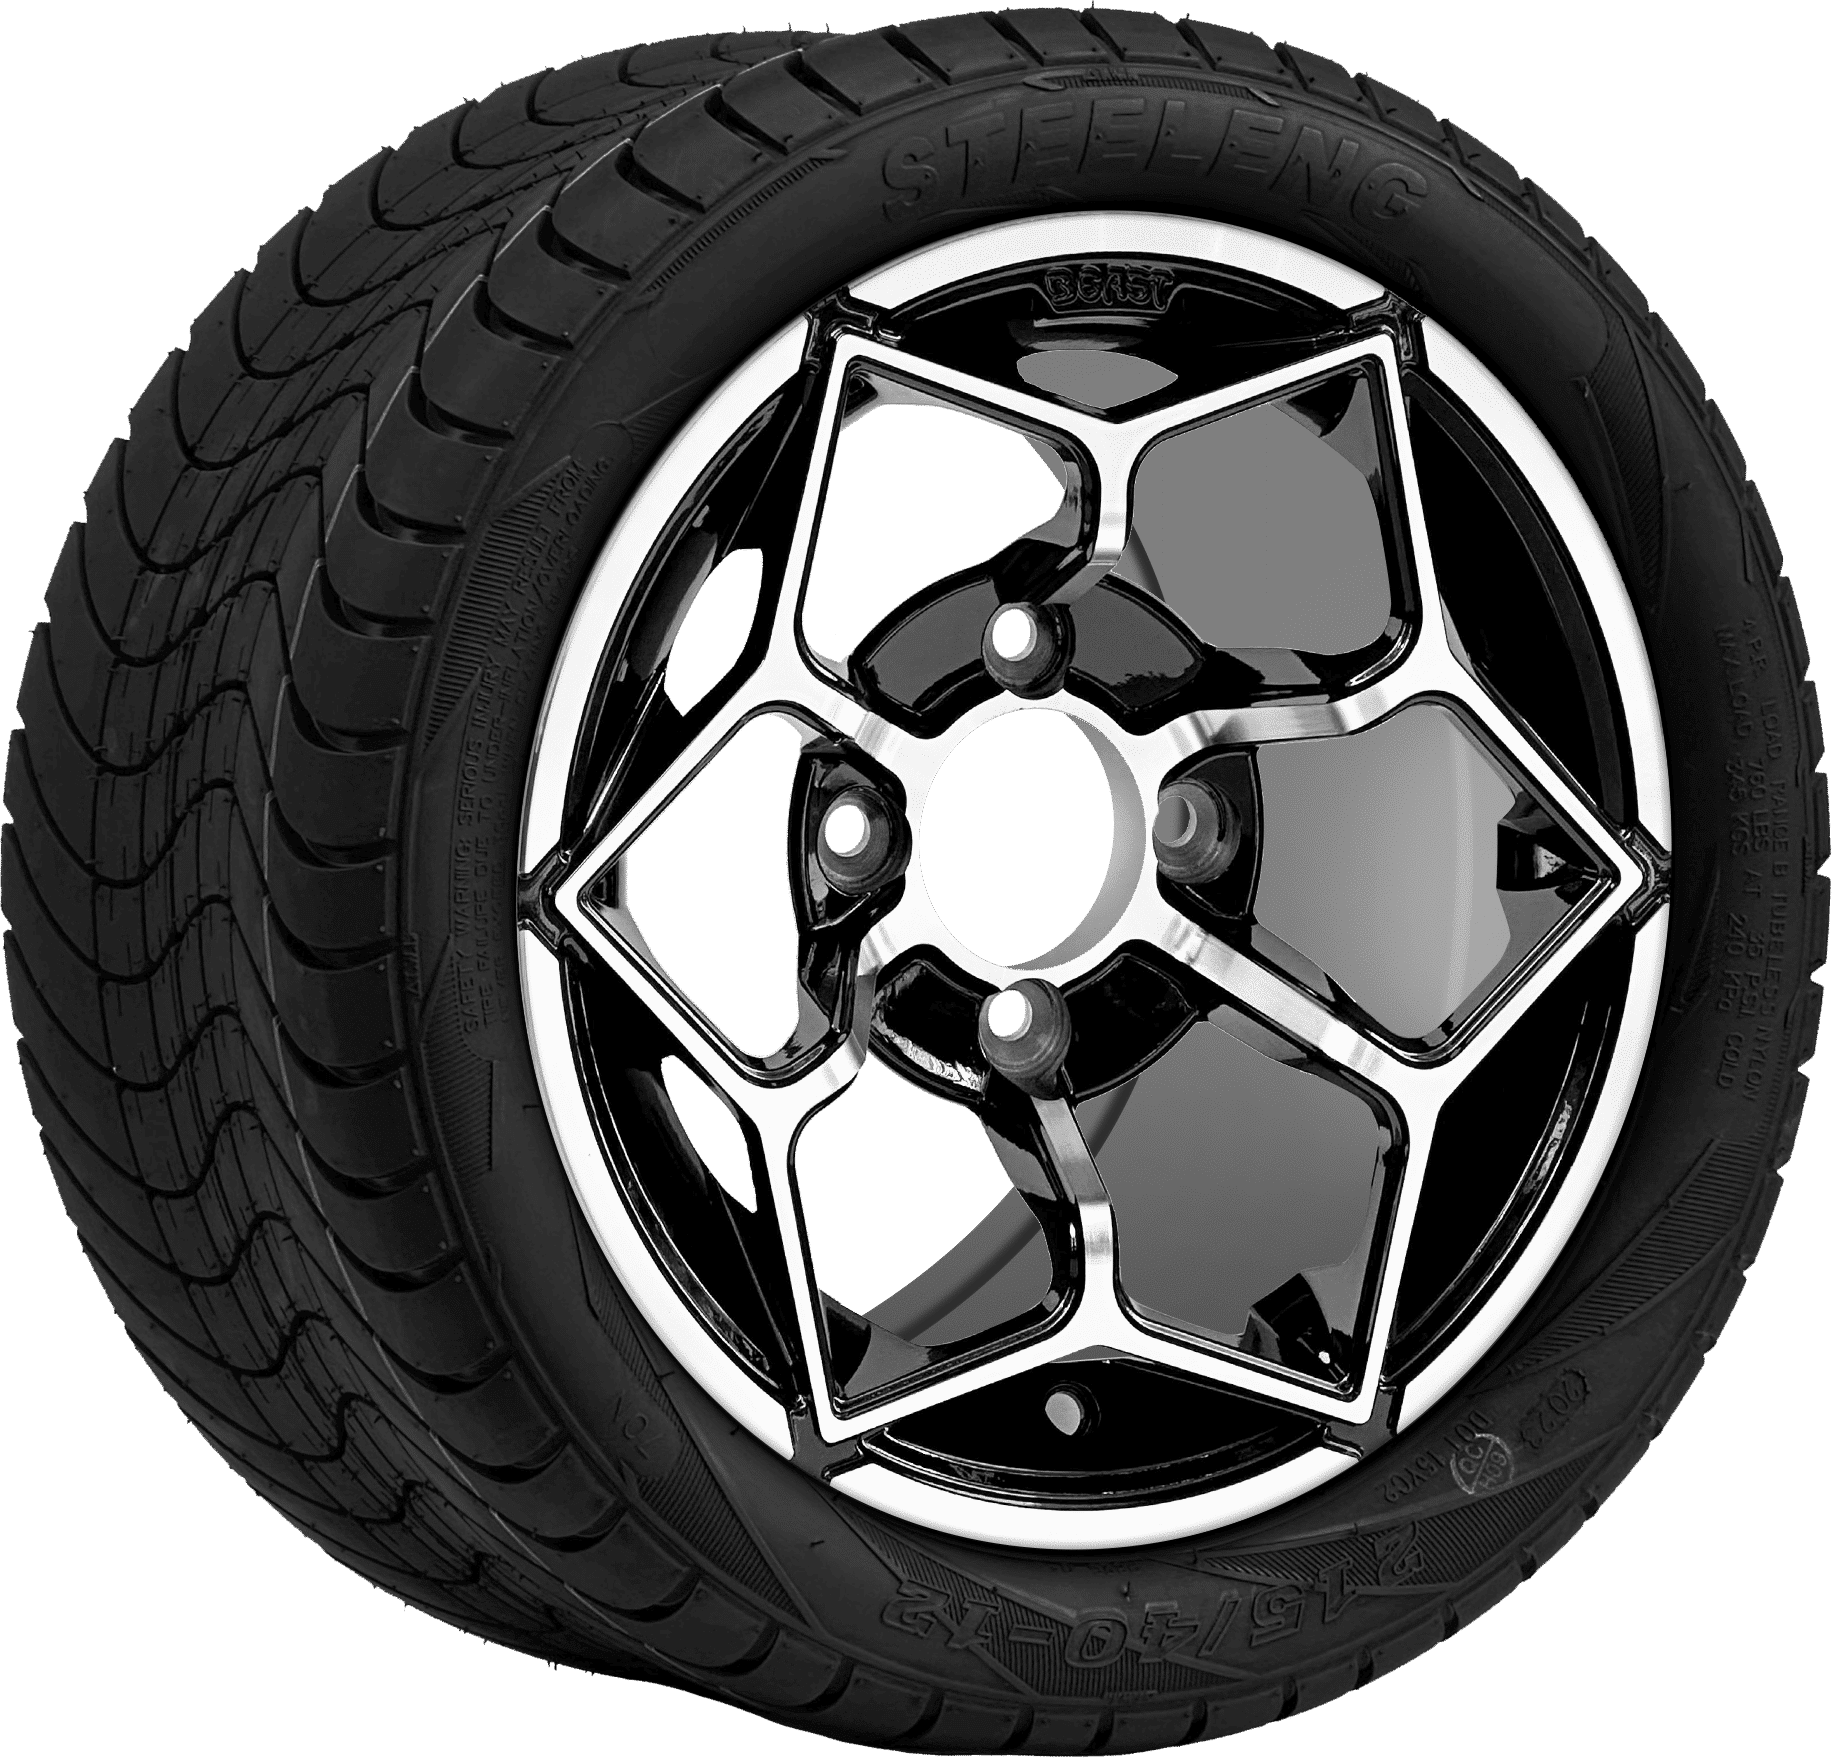 BNDL-TR1211-WH1266-CC0025-LN0001 12″ HAMMERHEAD MACHINED/BLACK WHEEL – ALUMINUM ALLOY / STEELENG 215/40-12 LOW PROFILE TIRE DOT APPROVED